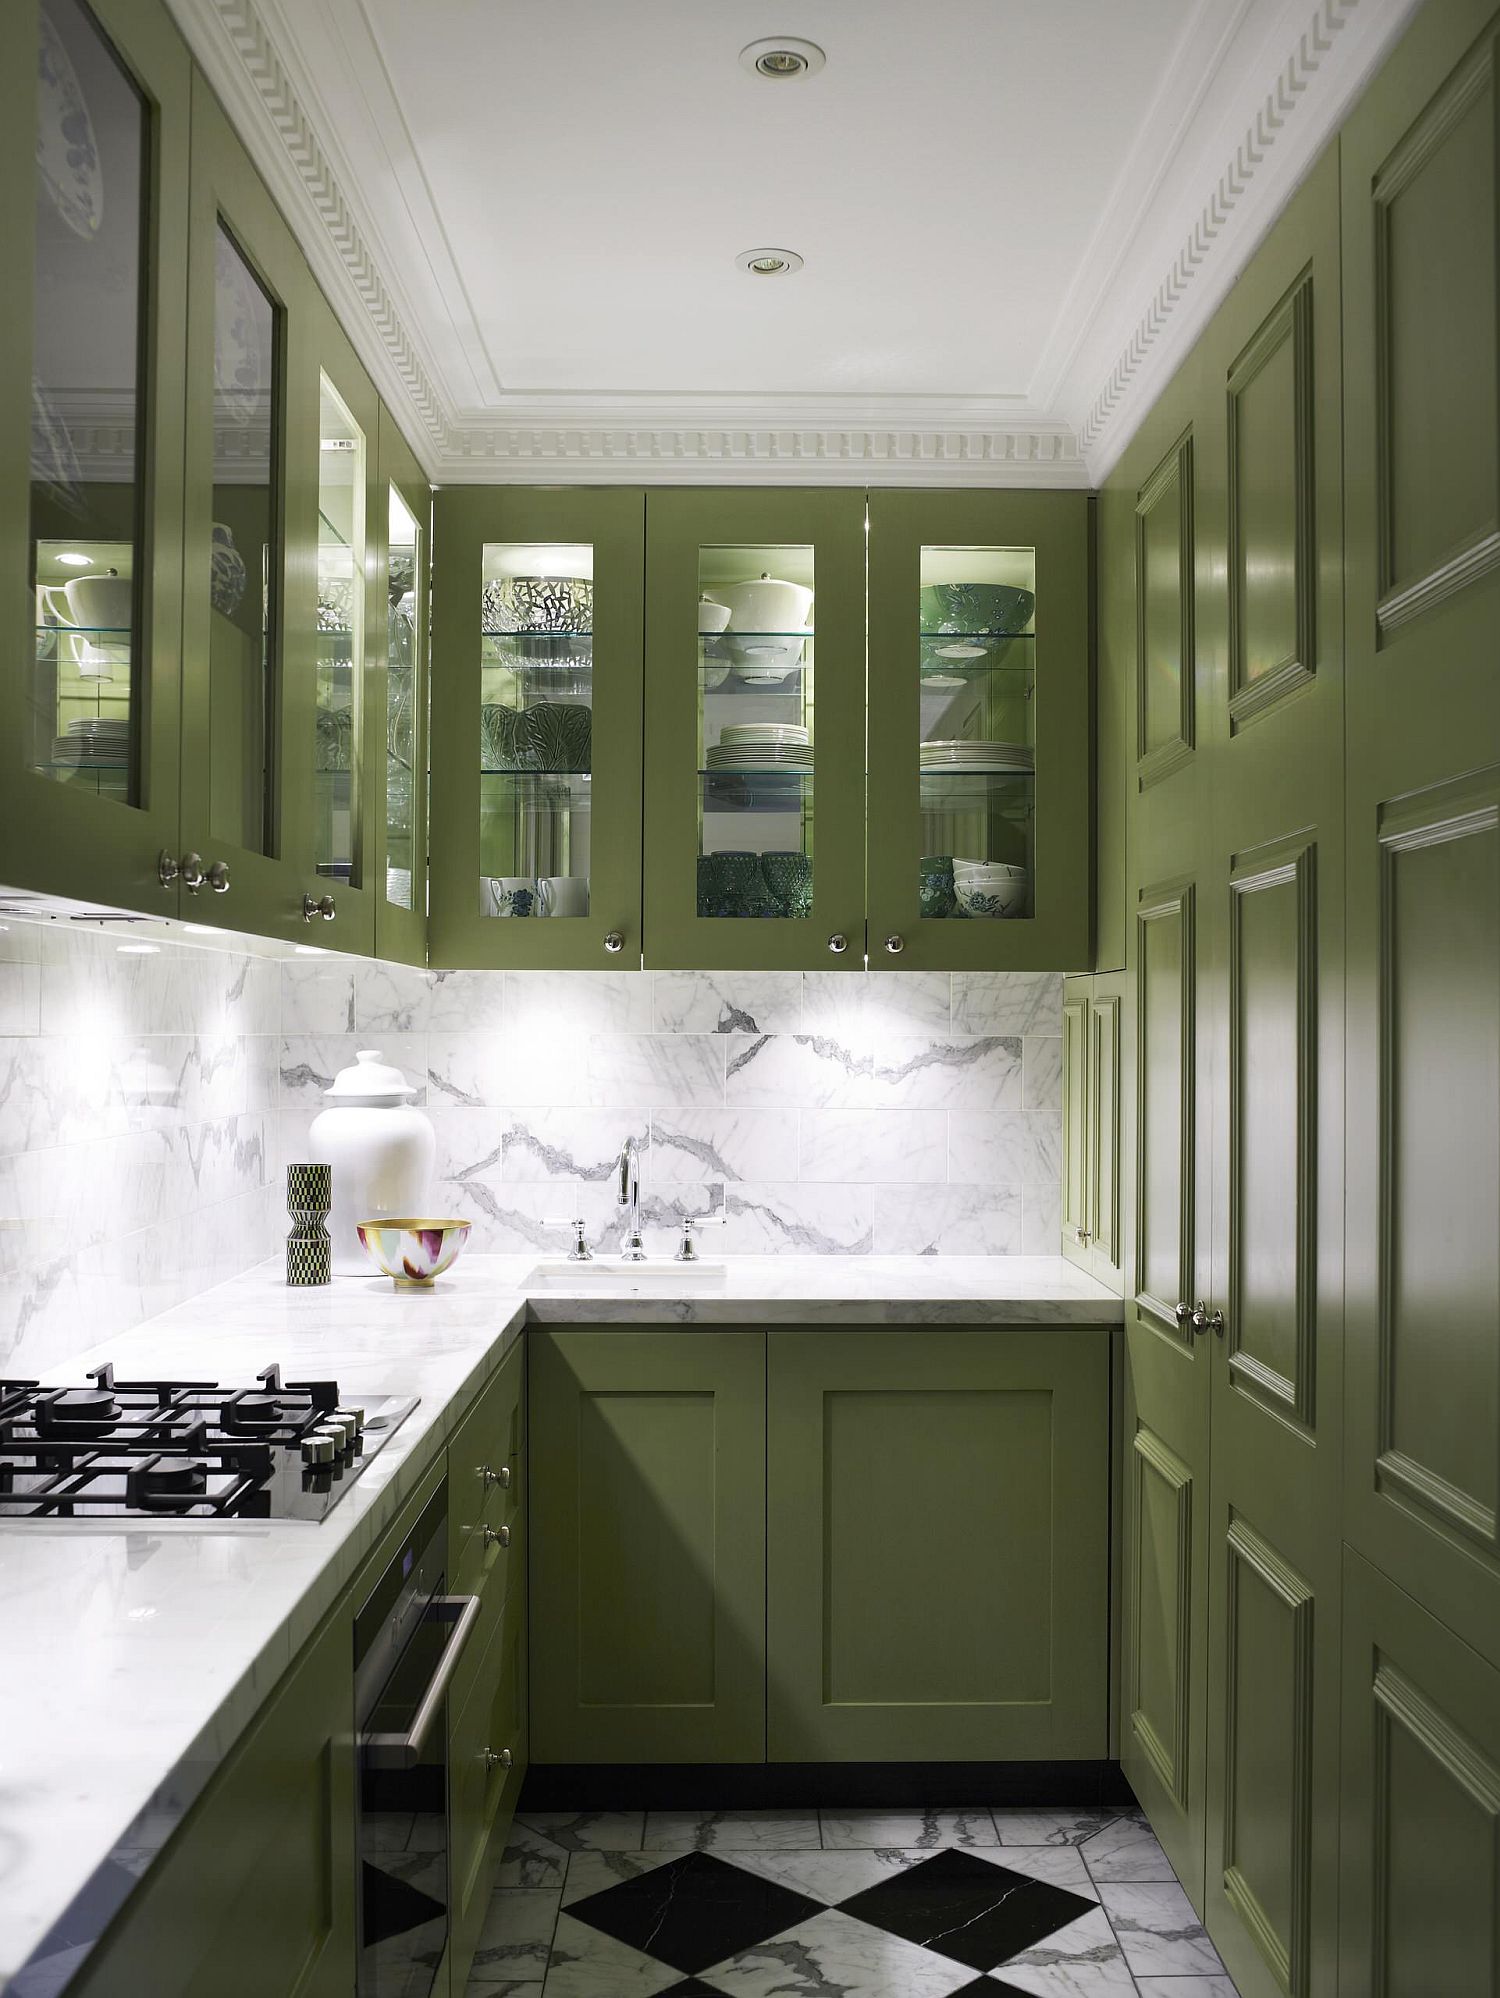 Combining-marble-with-dark-green-charisma-in-the-narrow-well-lit-kitchen